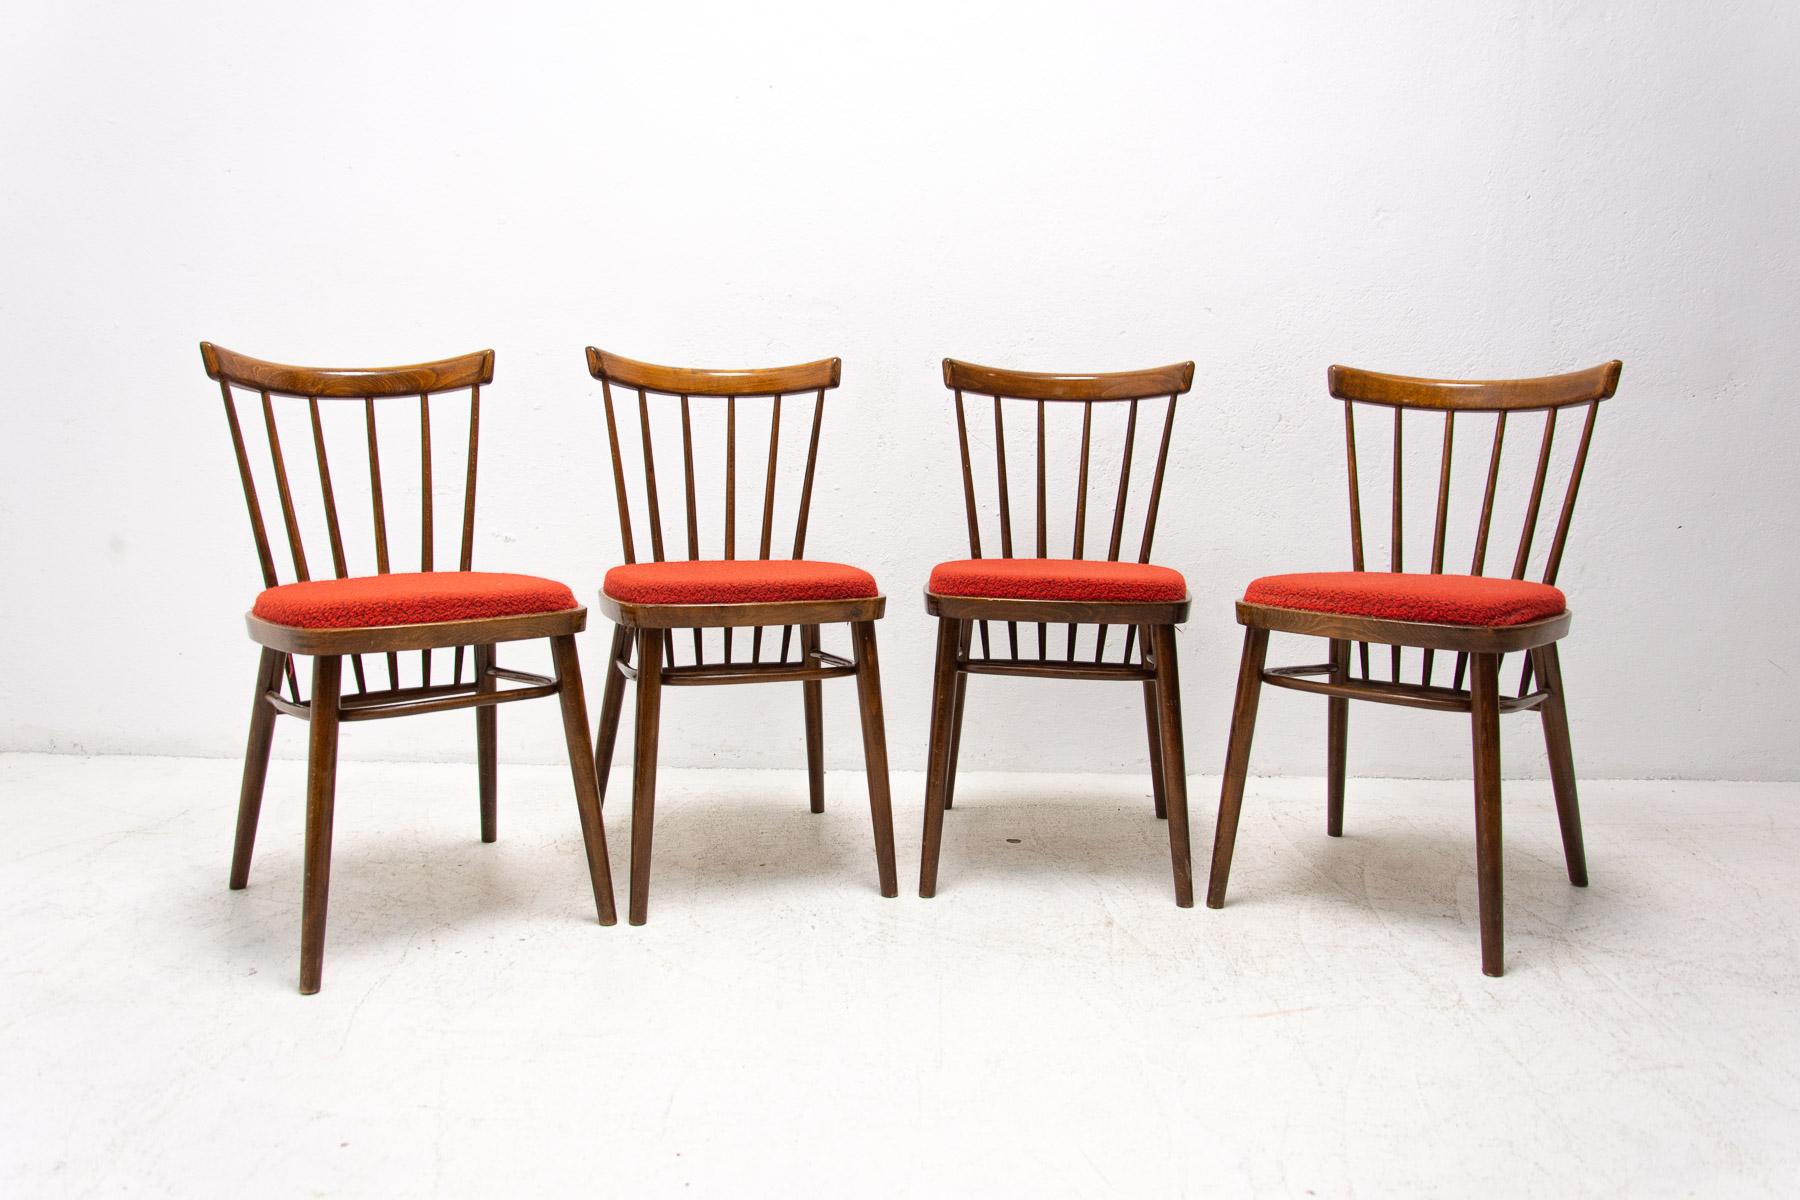 Czechoslovak dining chairs, 1960´s, designed by J.Kobylka and produced by Tatra nabytok Pravenec. Very interesting shaping. In very good vintage condition. Price is for the set of four.
  